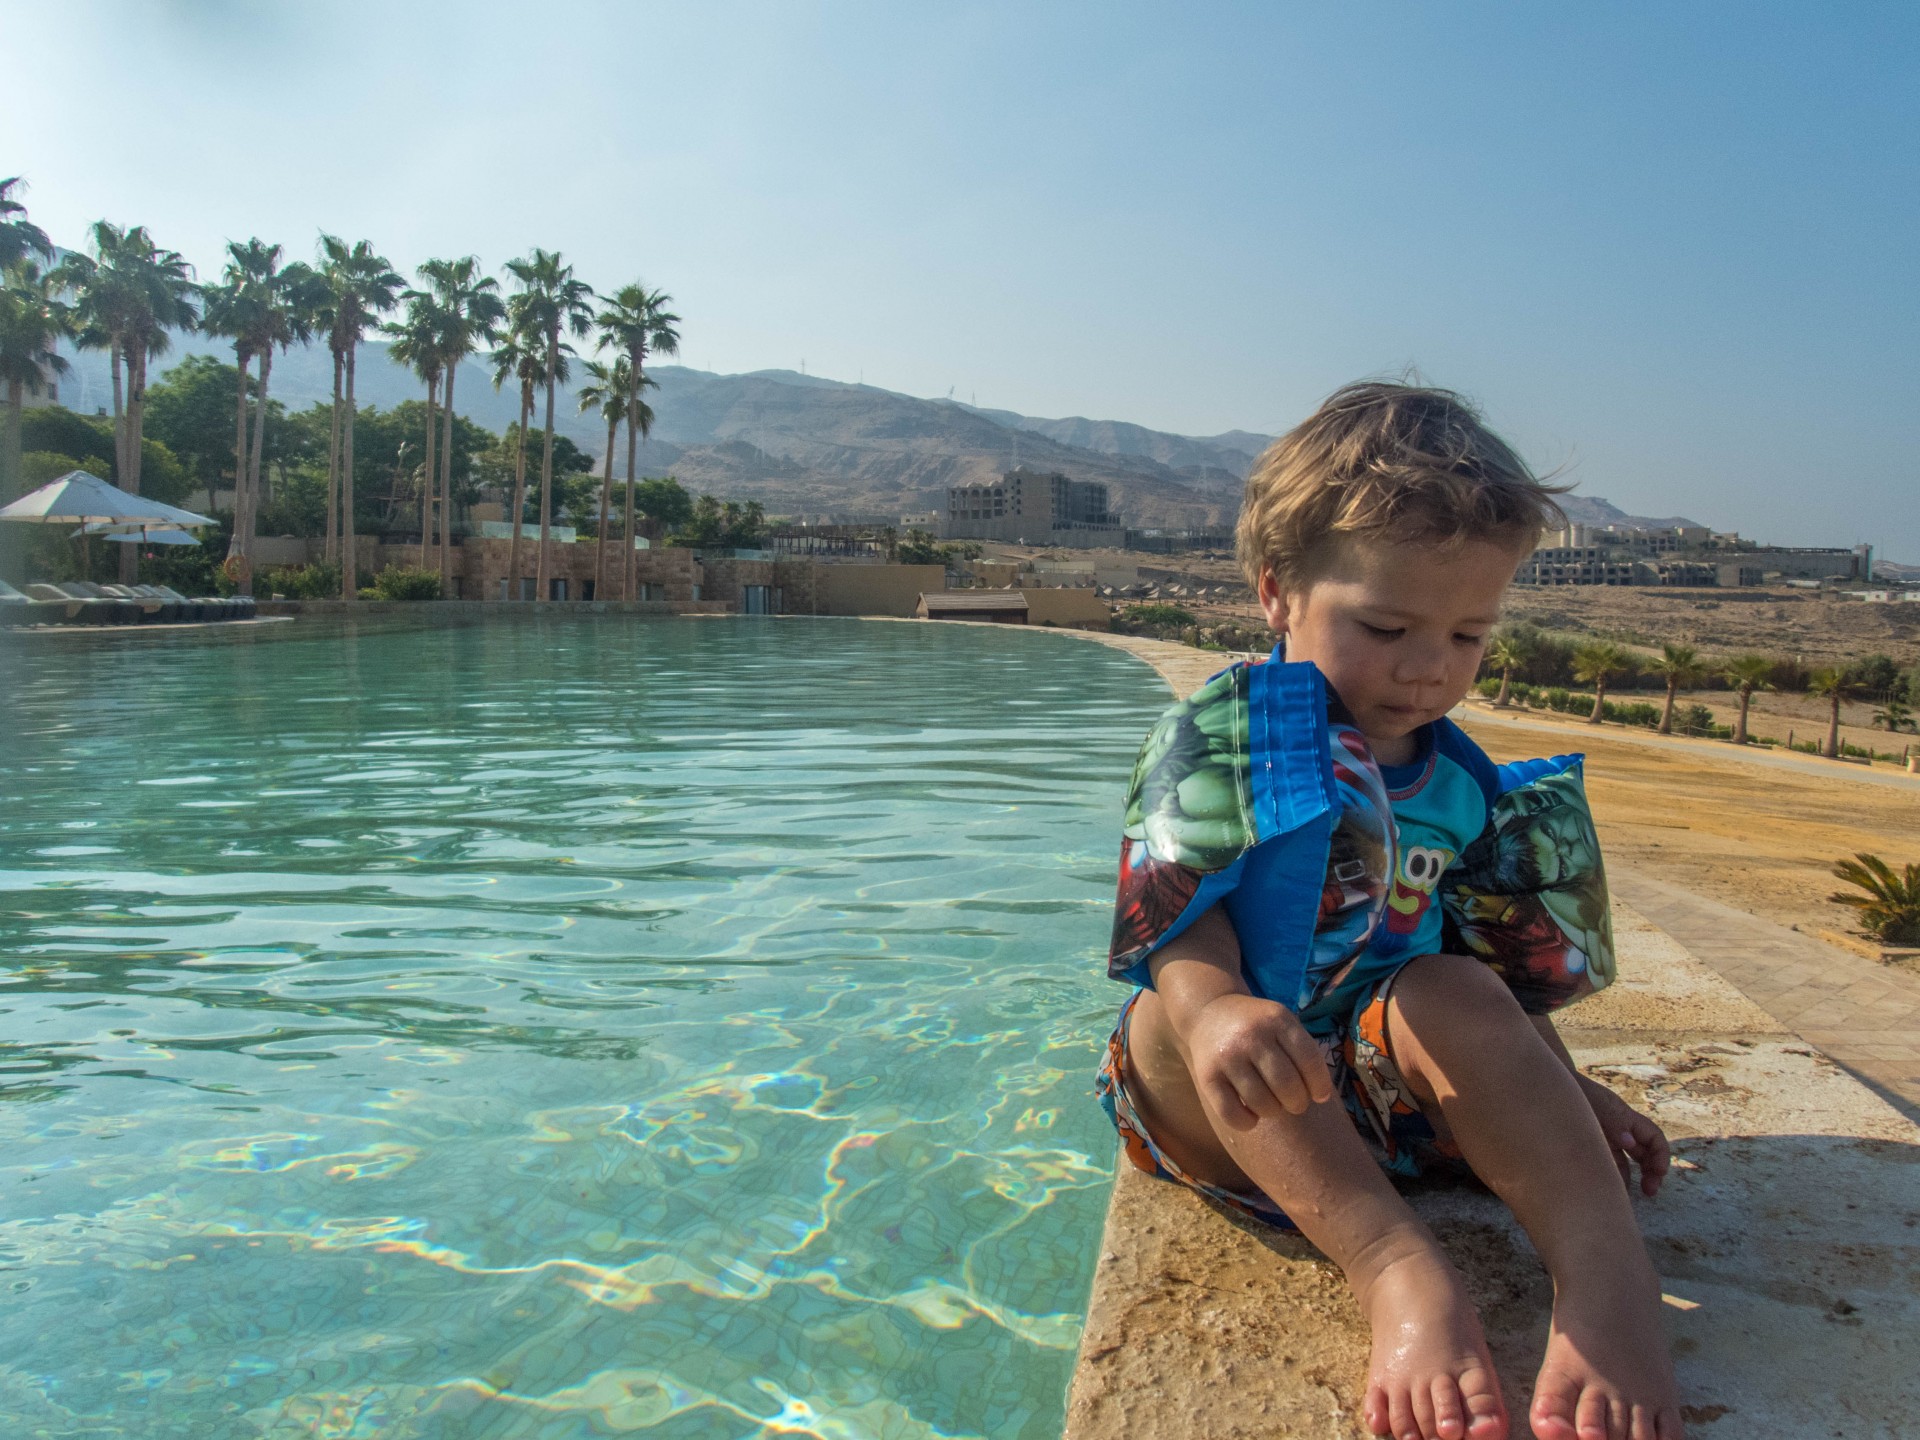 Toddler with water wings sits on the ledge of a pool with desert and palm trees in the background at the Kempinski Hotel